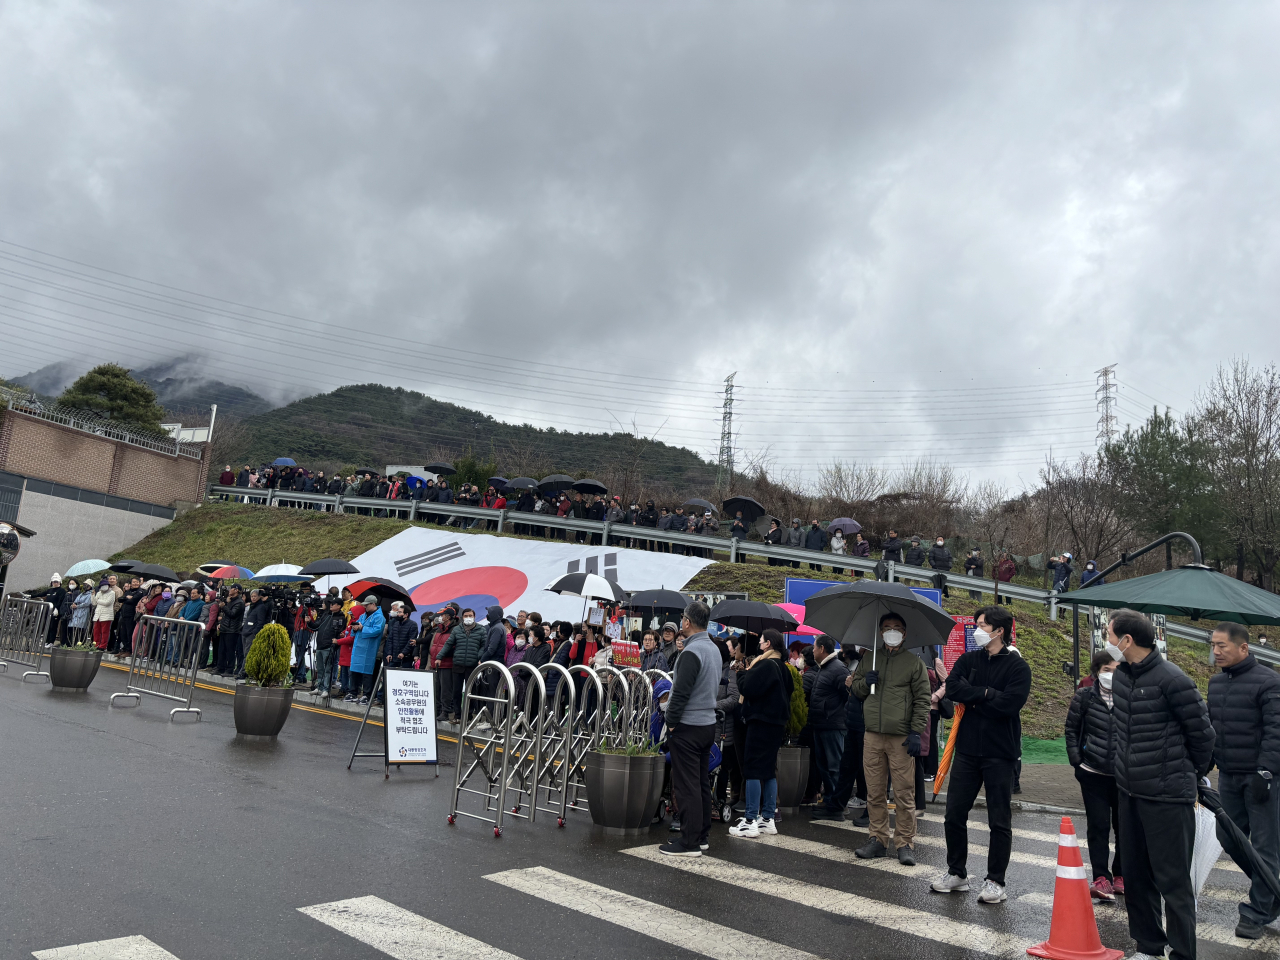 Crowds wait outside the home of former President Park Geun-hye in Daegu on Tuesday, following news that leaders of the ruling People Power Party were due to visit. (Kim Arin/The Korea Herald)